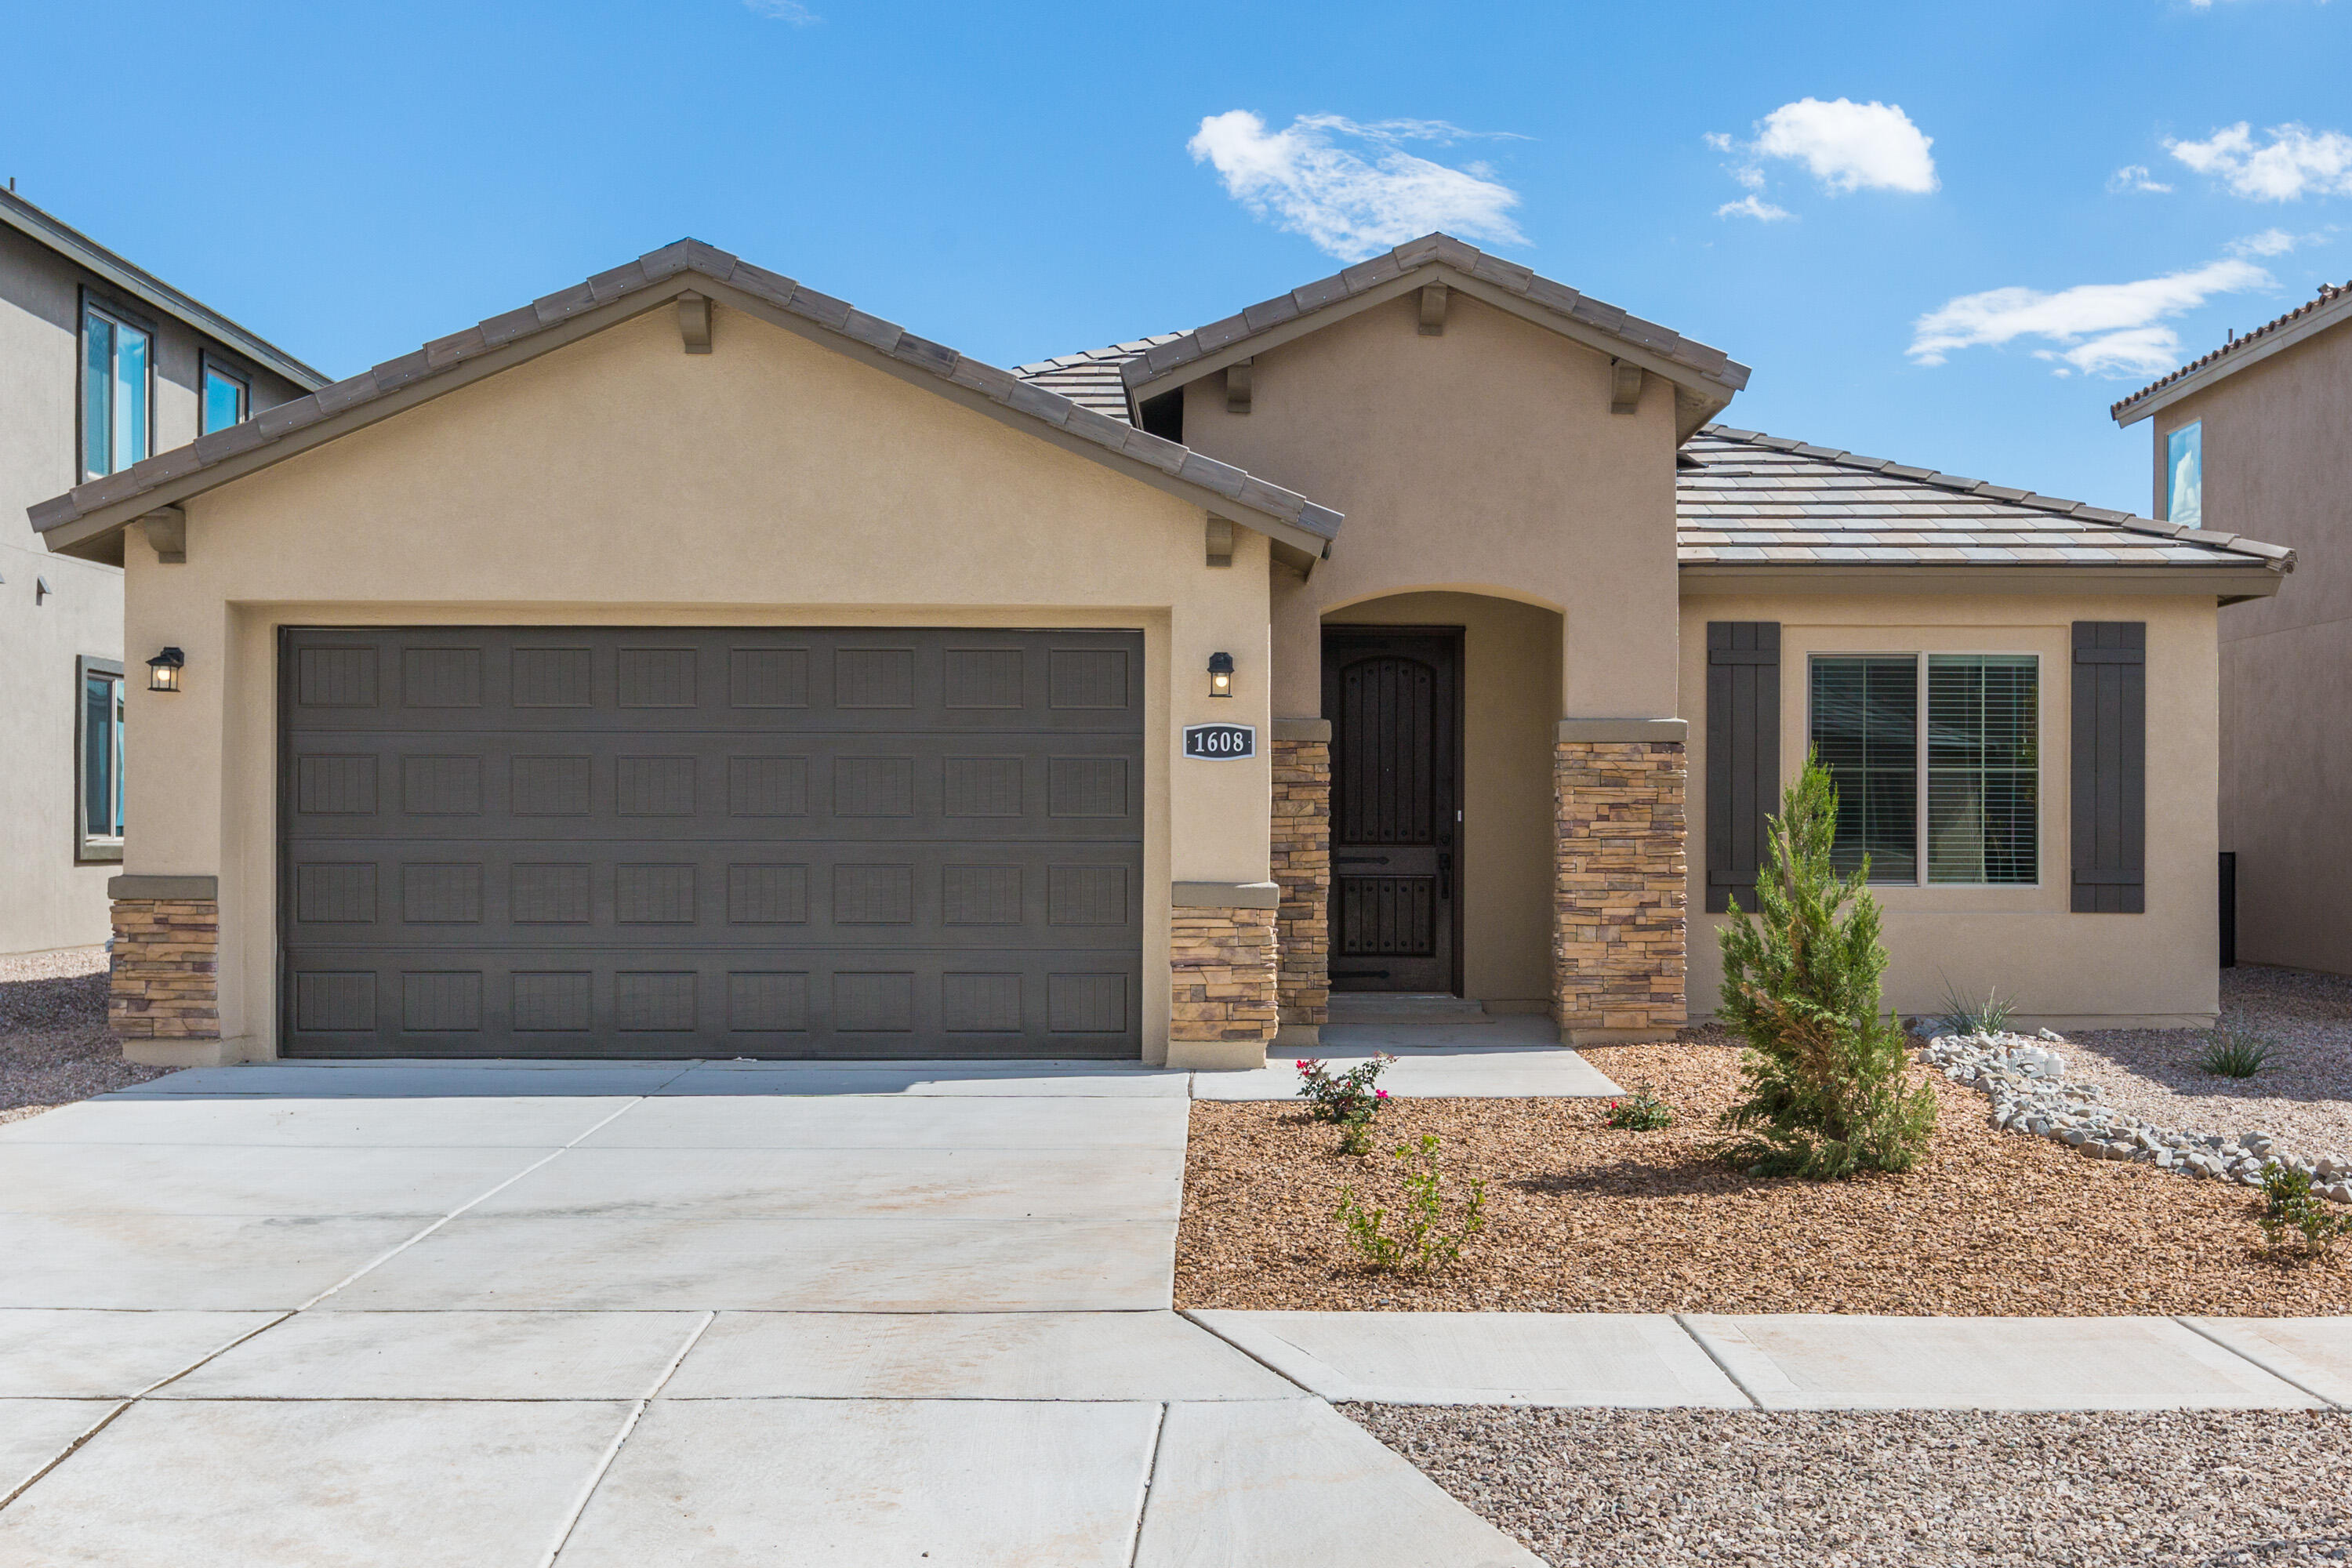 Stunning floorplan in Pulte's newest gated community. This home has a dream kitchen that any chef would love including built in stainless-steel appliances. Covered Patio is the perfect spot to get away backing to community park. This home is a must see.